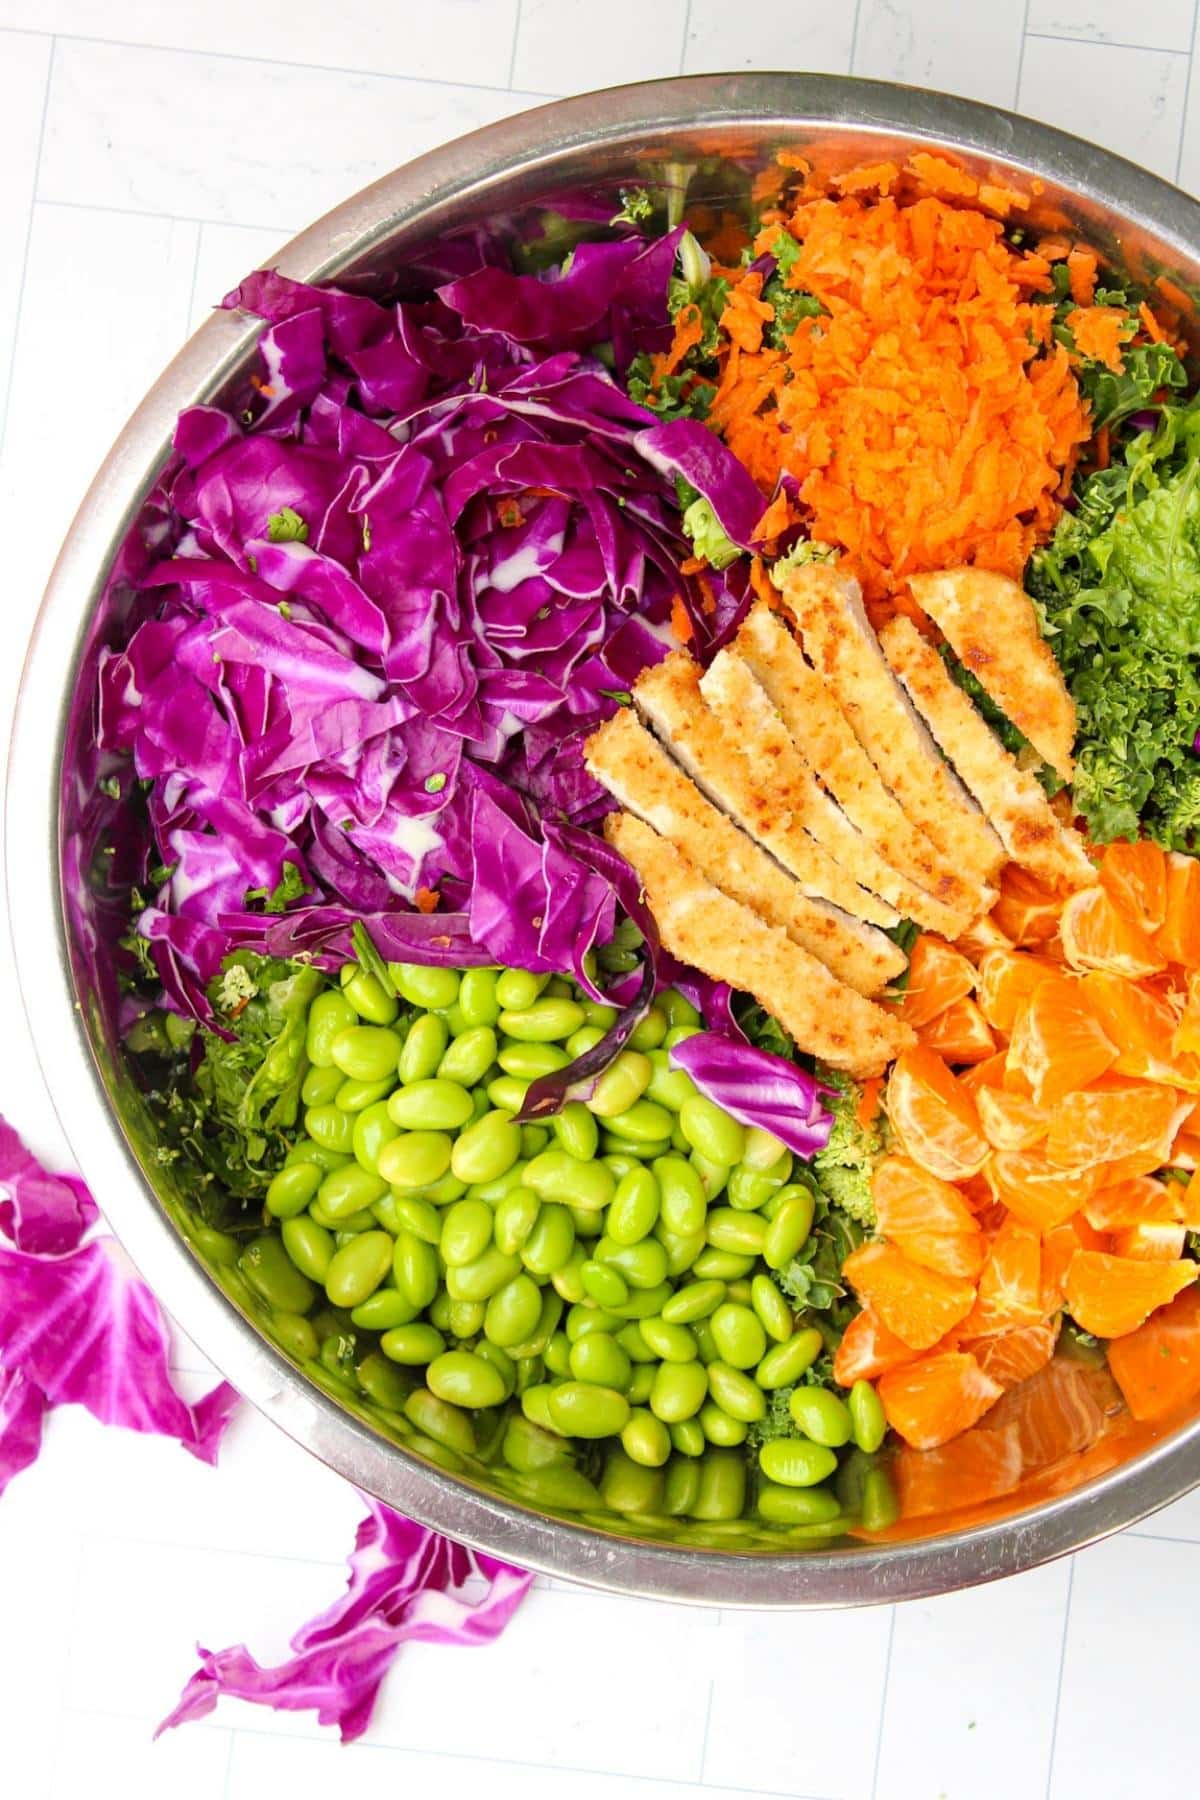 Overhead view of large mixing bowl filled with rainbow salad.